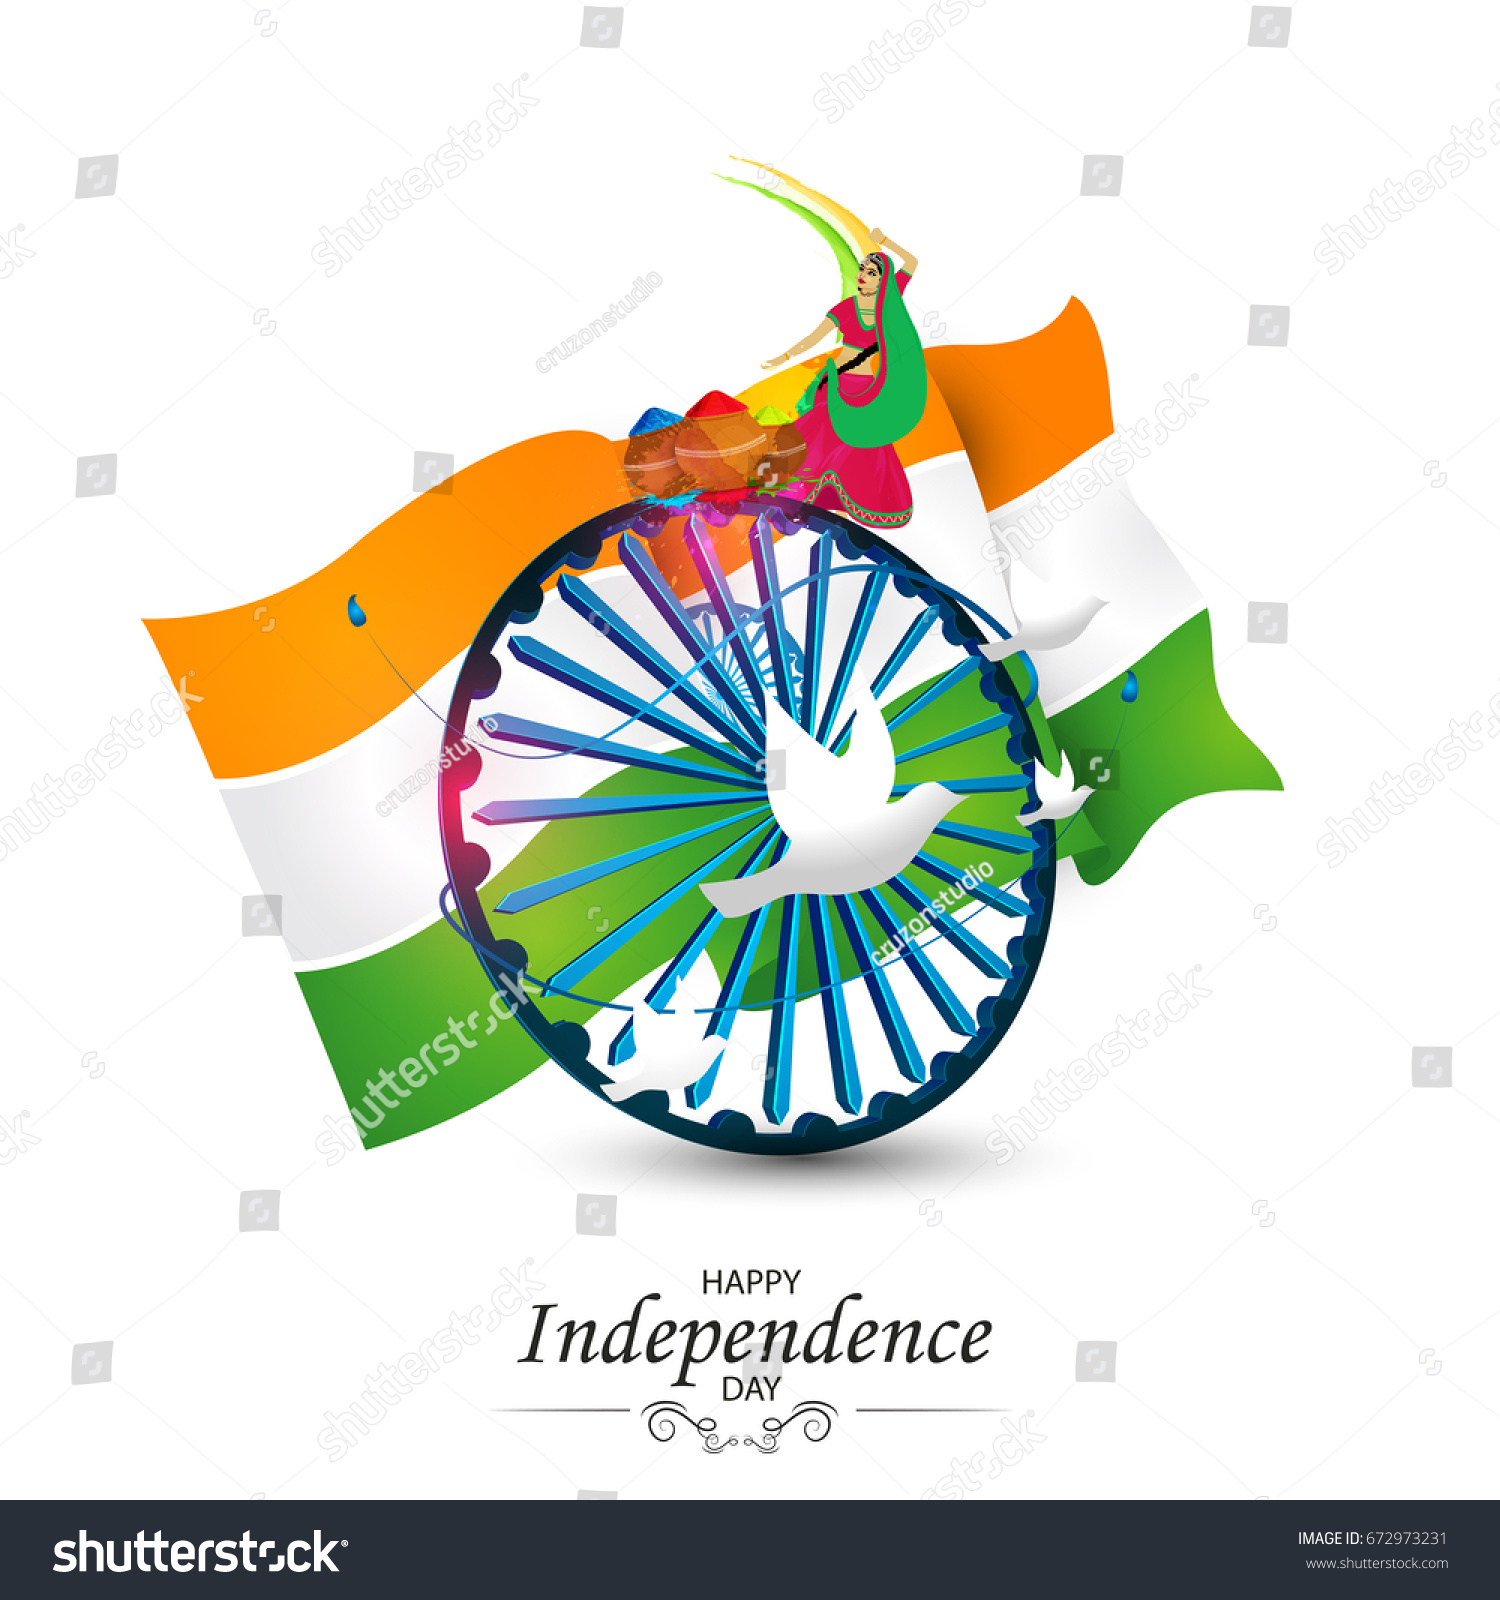 Happy Independence Day India Vector Illustration Stock Vector (Royalty ...